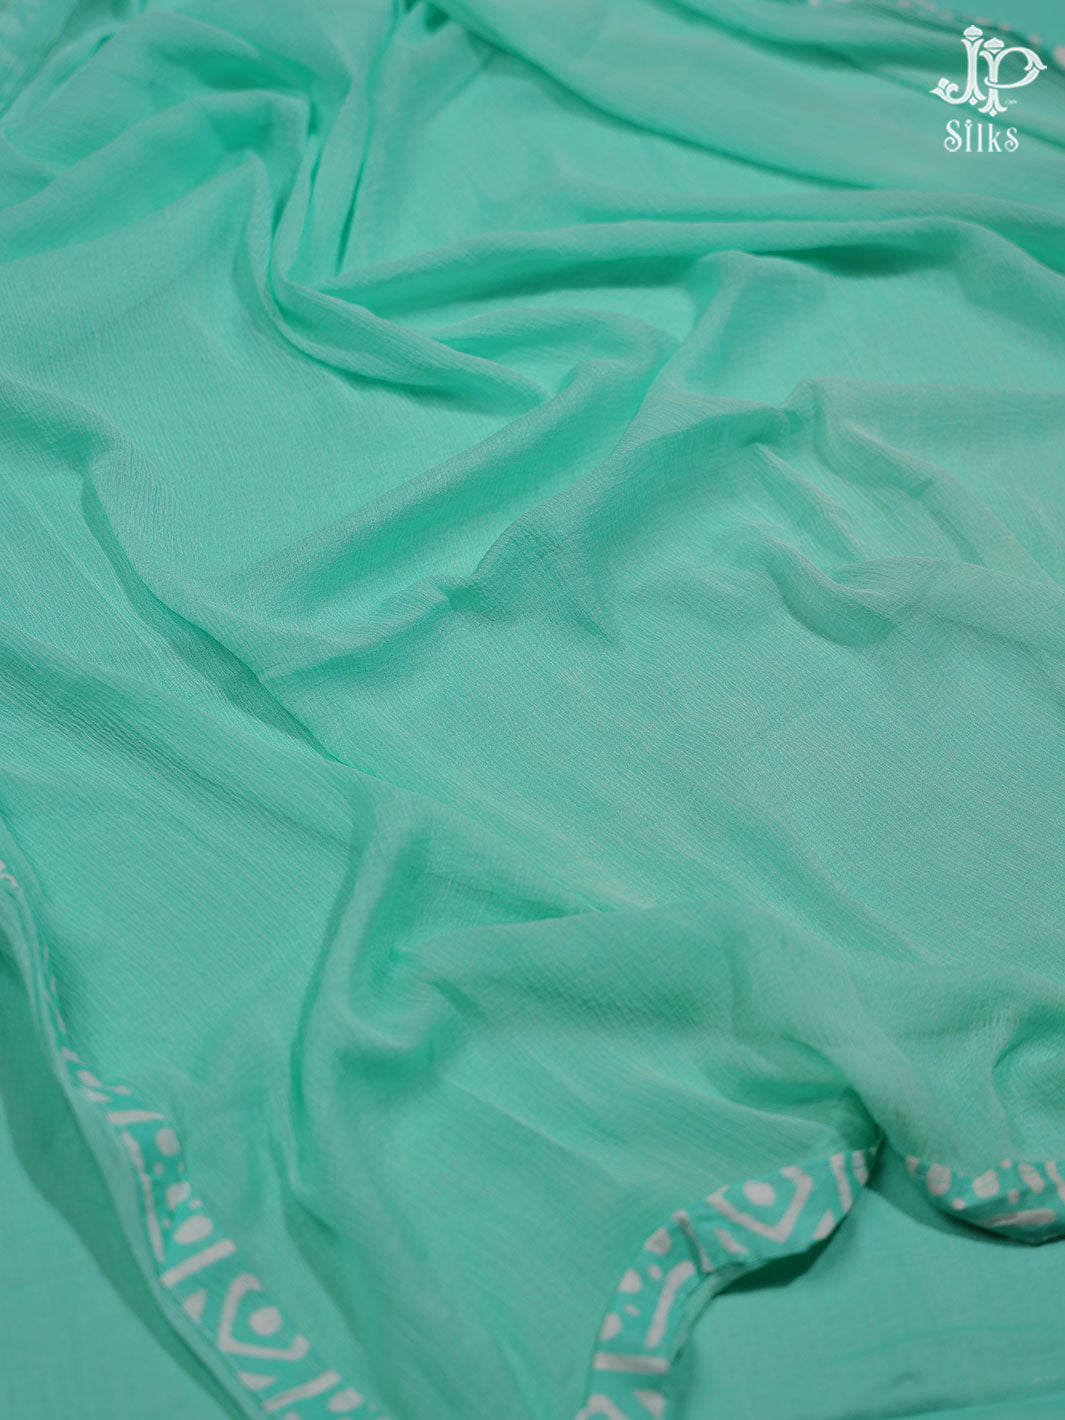 White and Turquoise Blue Cotton Chudidhar Material - D5151 - View 3